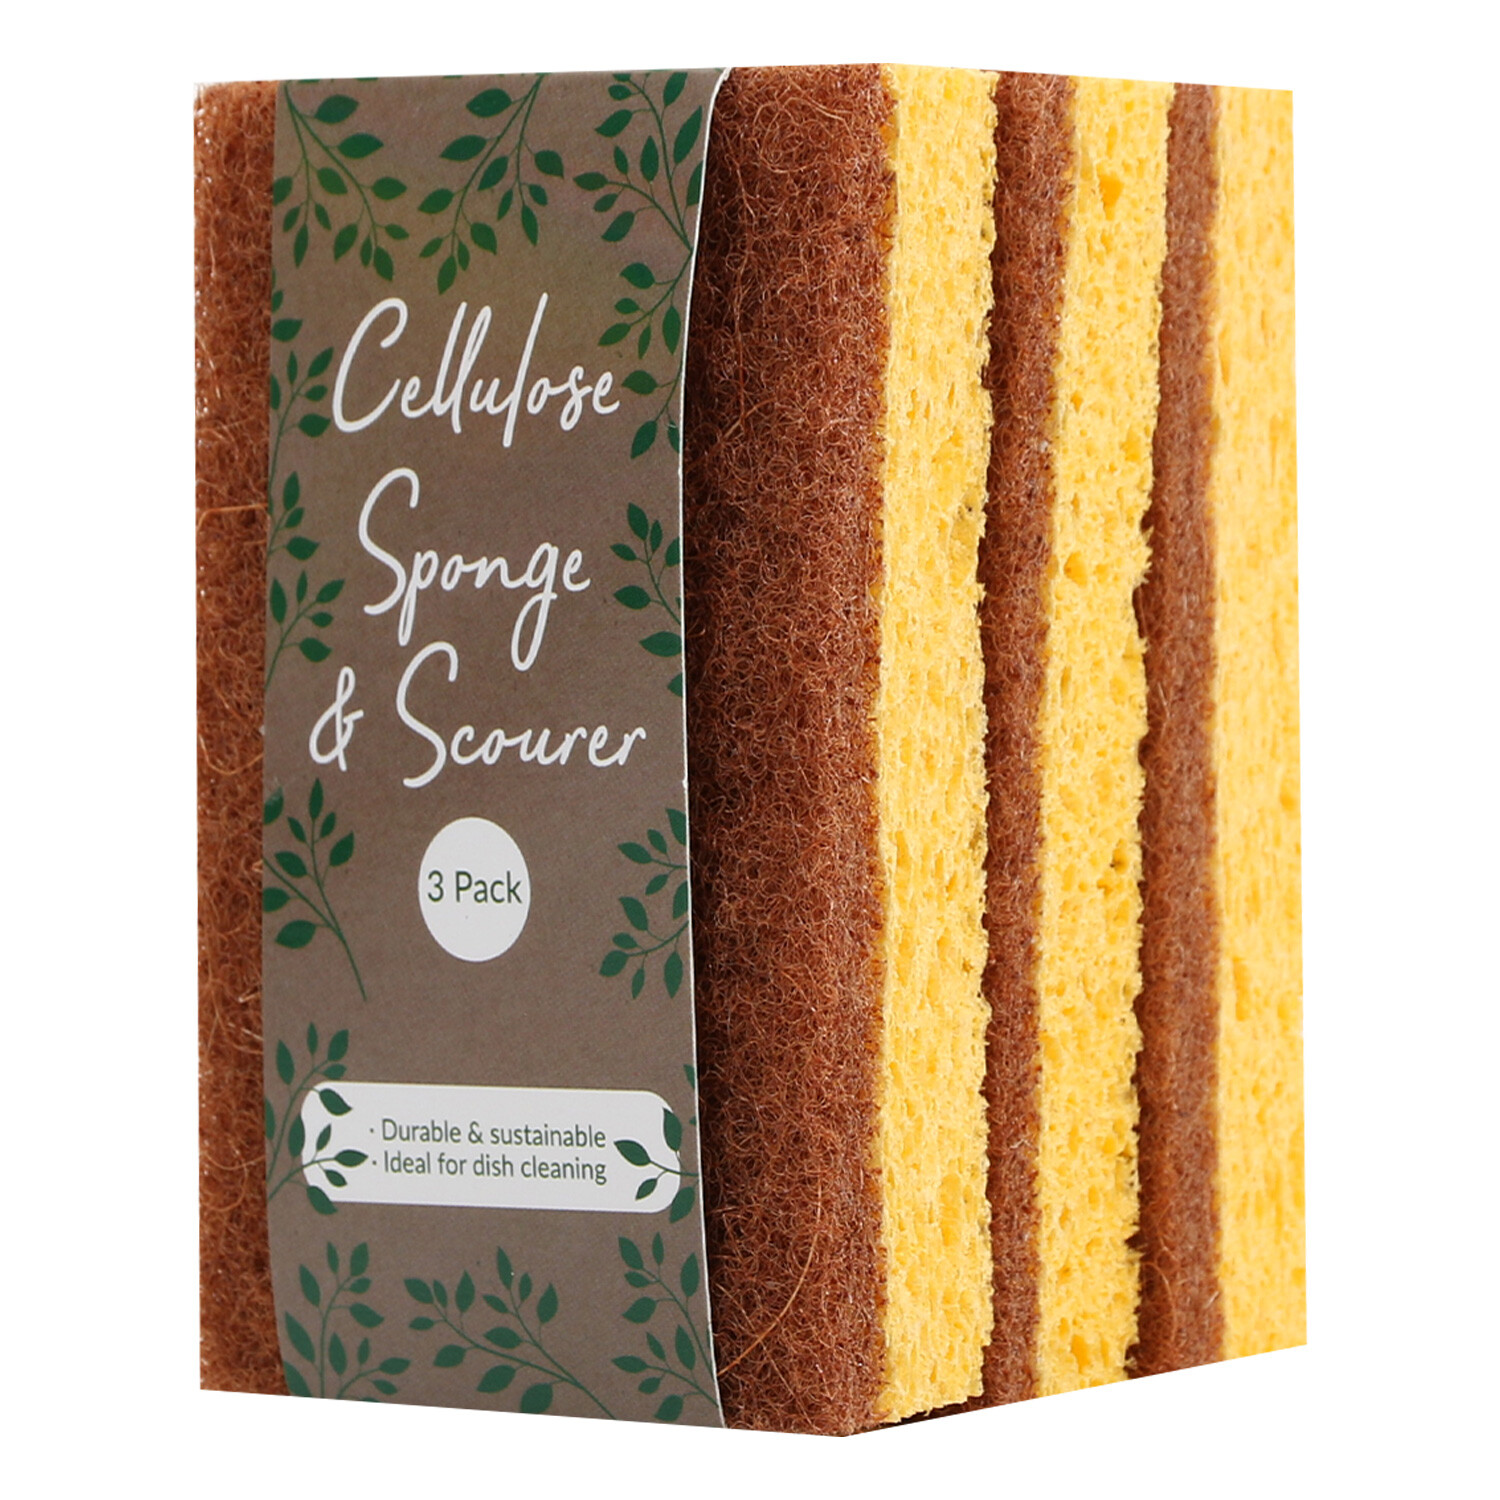 Pack of 3 Cellulose Sponge Scourers - Yellow Image